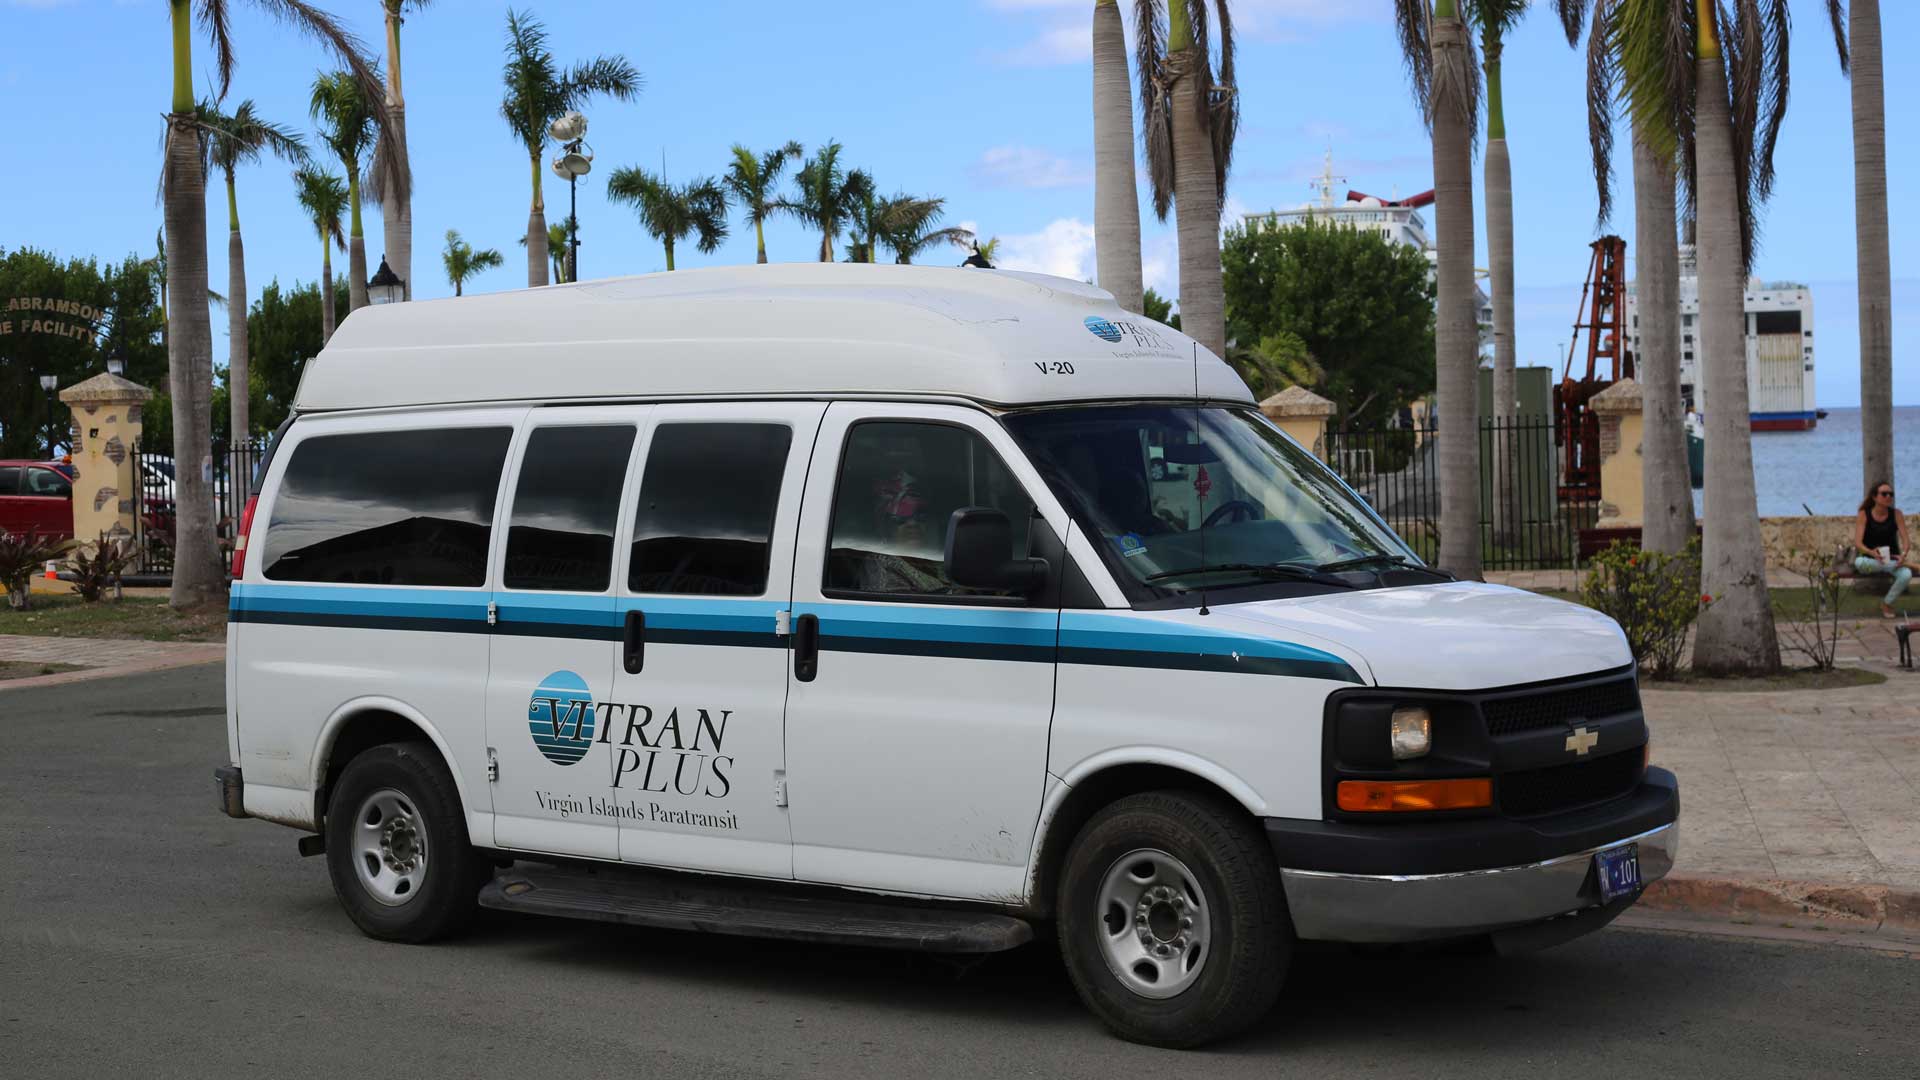 VITRAN Technology Platform Allows It To See Paratransit Vehicles In Real Time